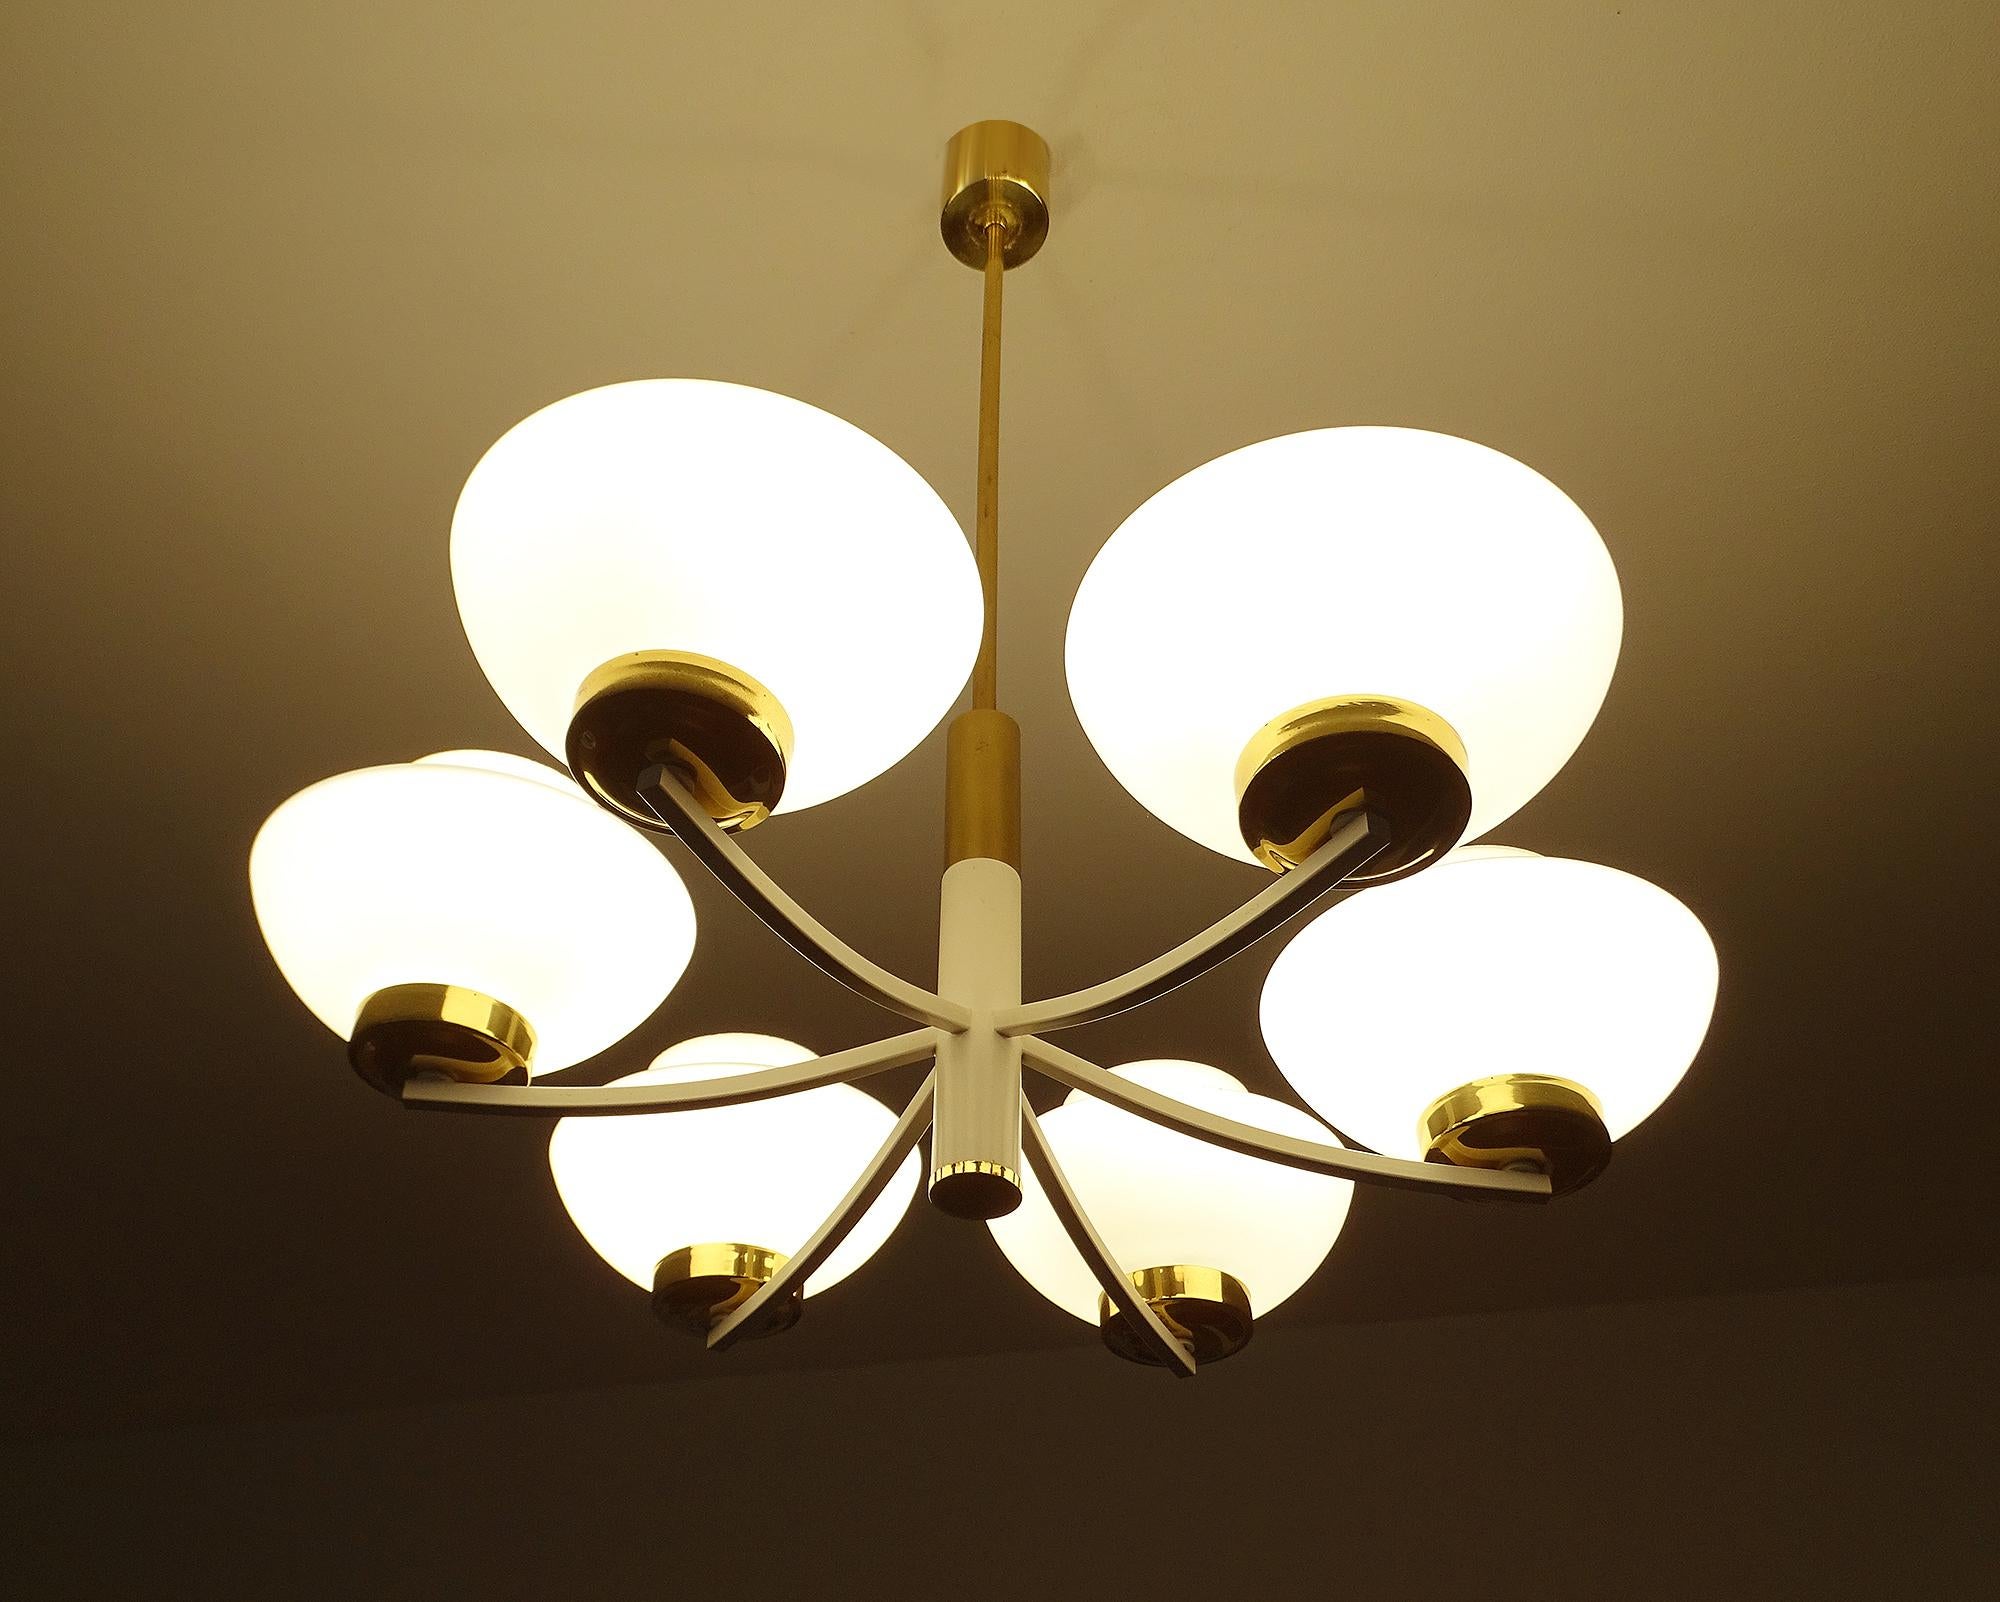 1960s midcentury chandelier in the manner of Stilnovo, white enameled arms with brass trim, flattened amphora shape opaline glass shades.
Wiring: The lamps have been tested with US American light bulbs under 120v and they work flawlessly. 